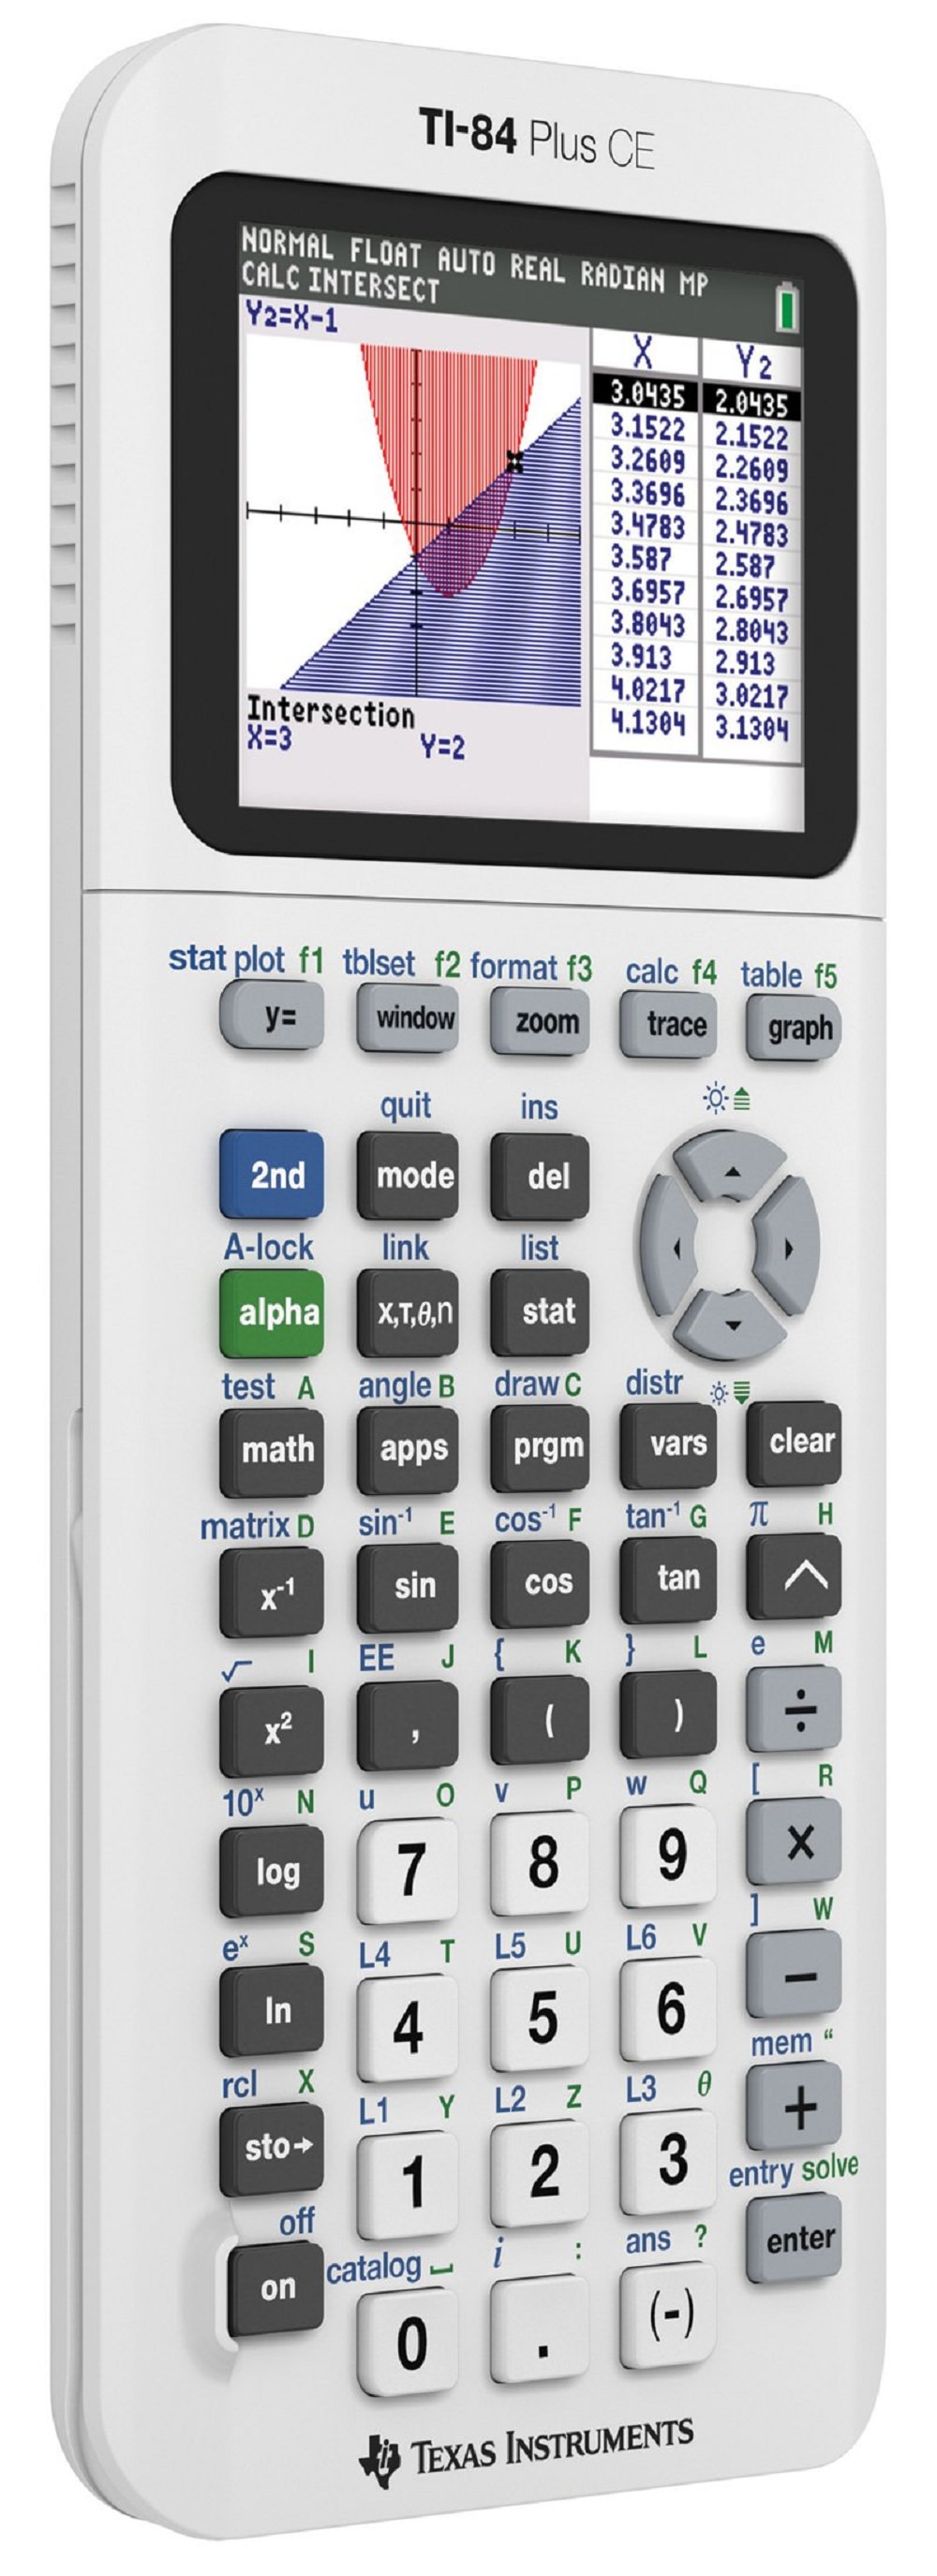 Texas Instruments TI-84 Plus CE Graphing Calculator, White - image 3 of 3